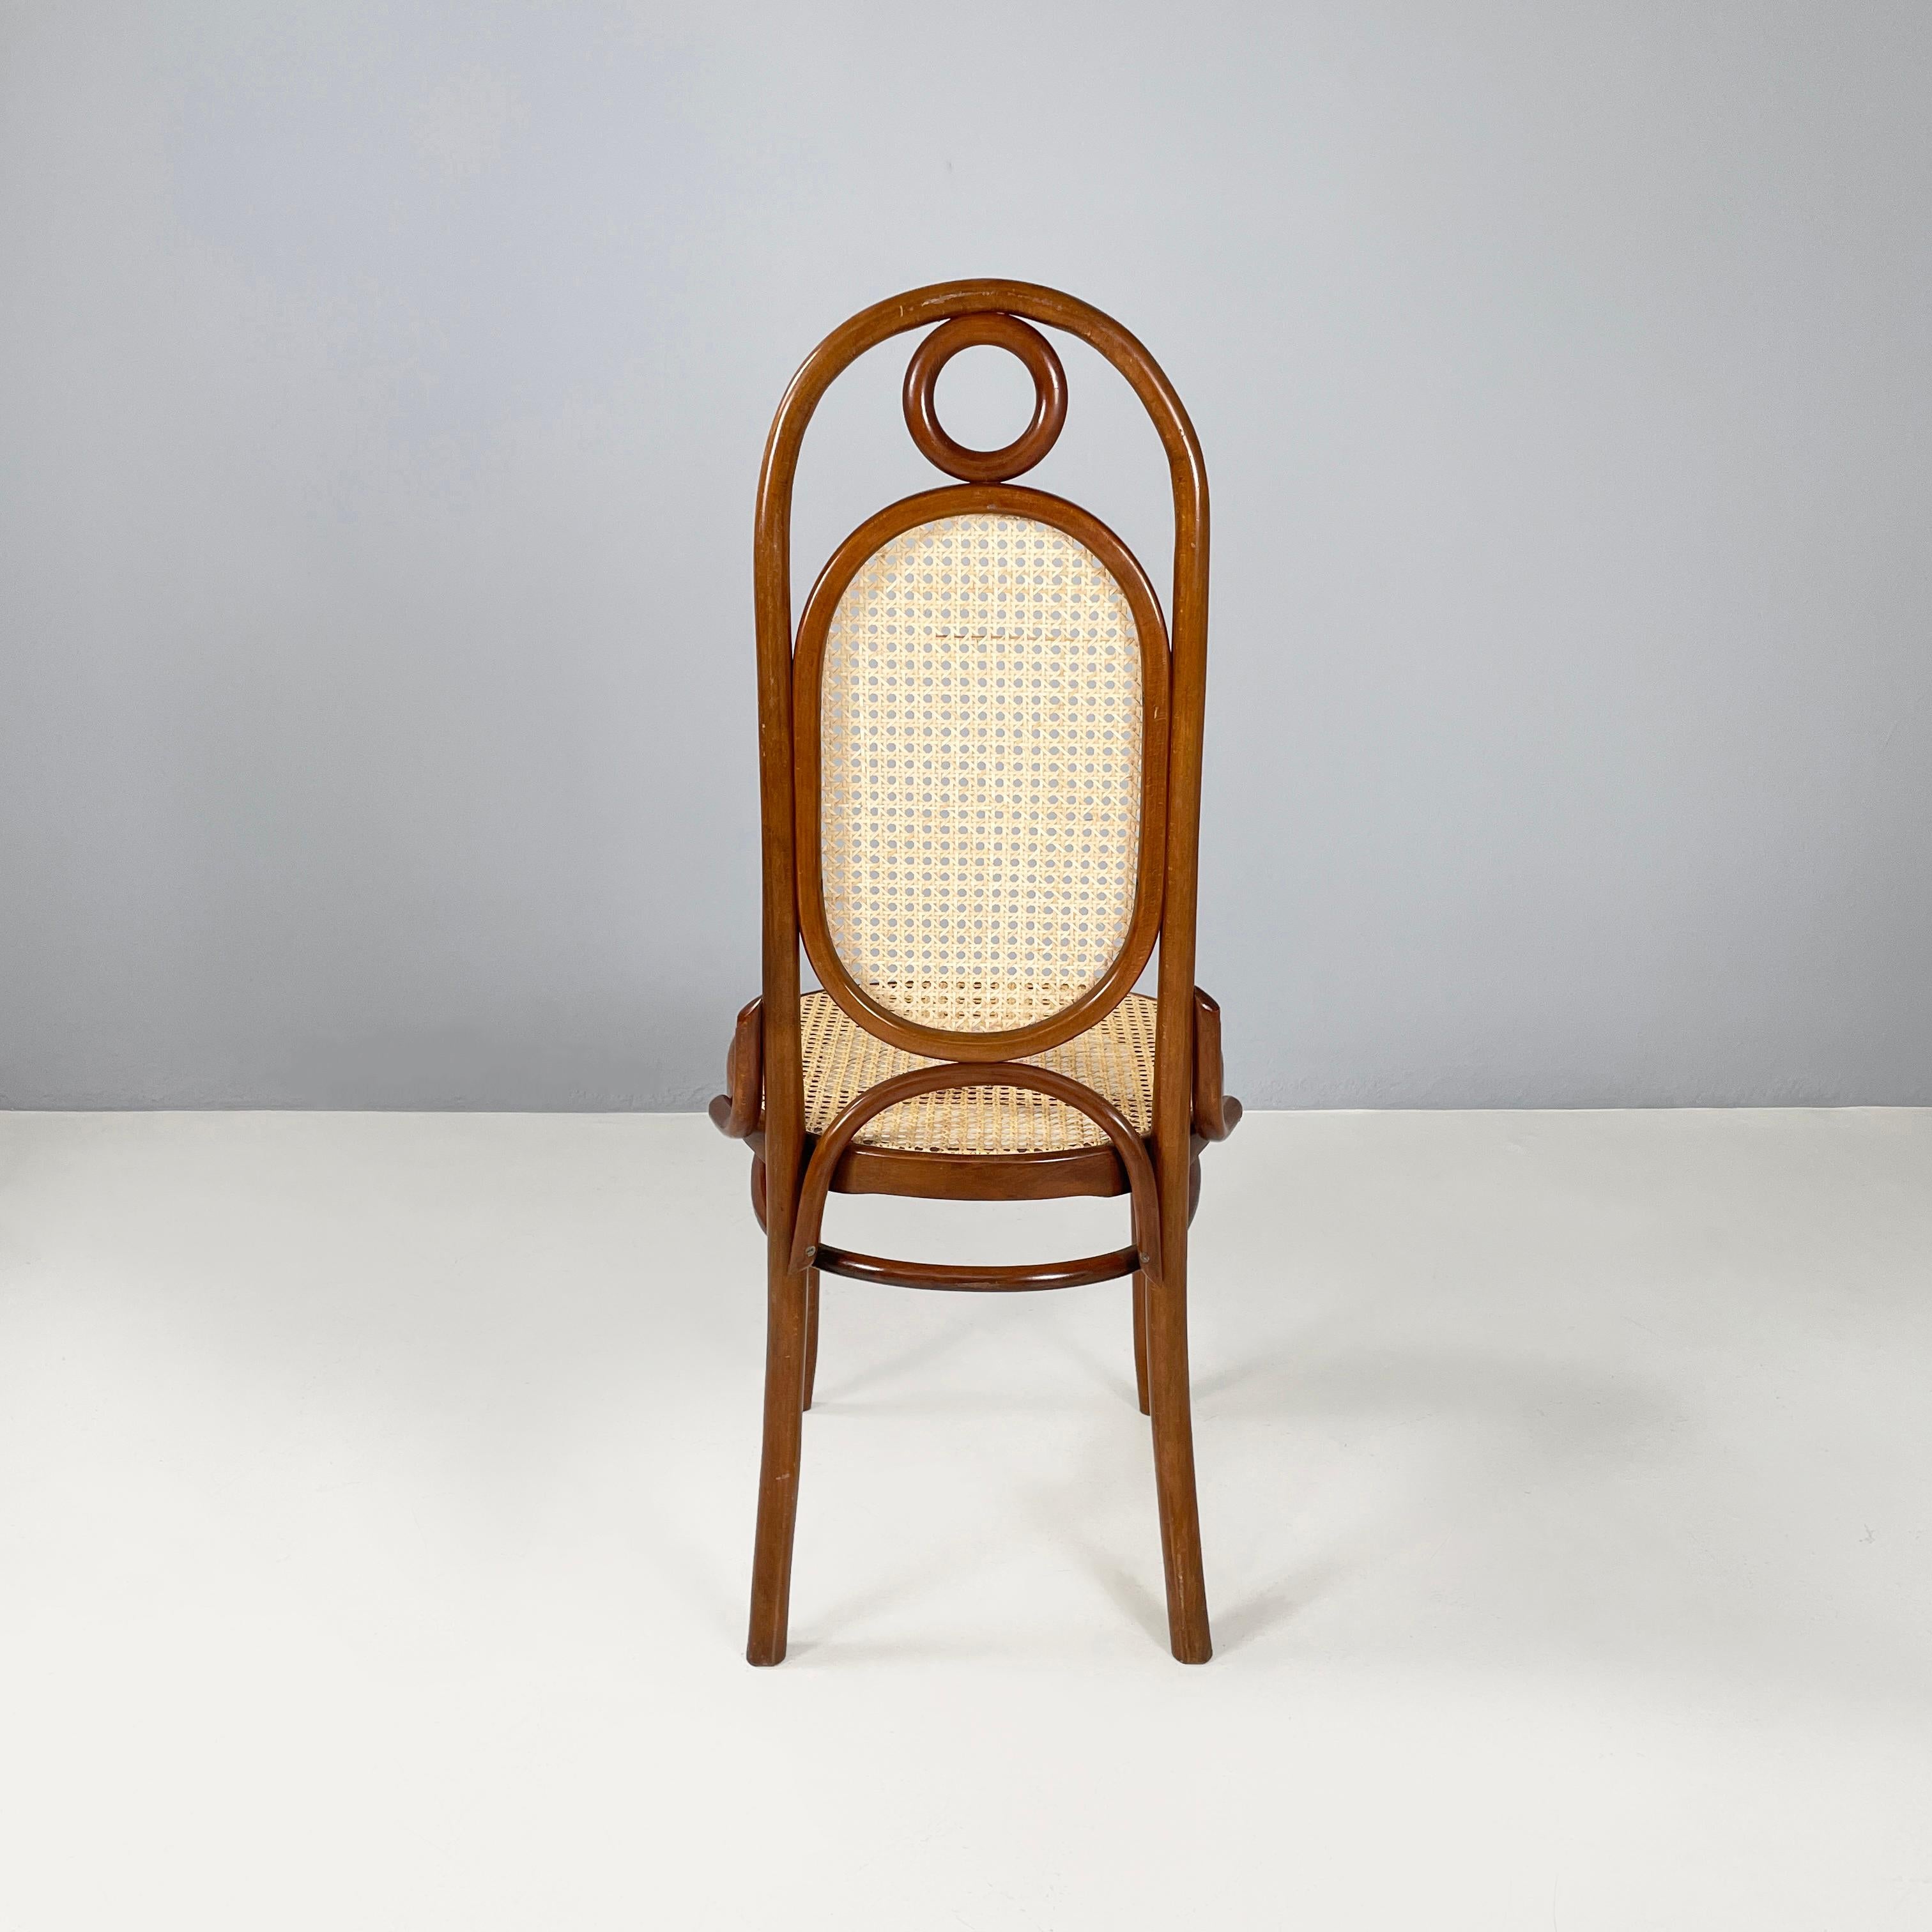 Straw Italian Chair in straw and wood, 1900-1950s For Sale